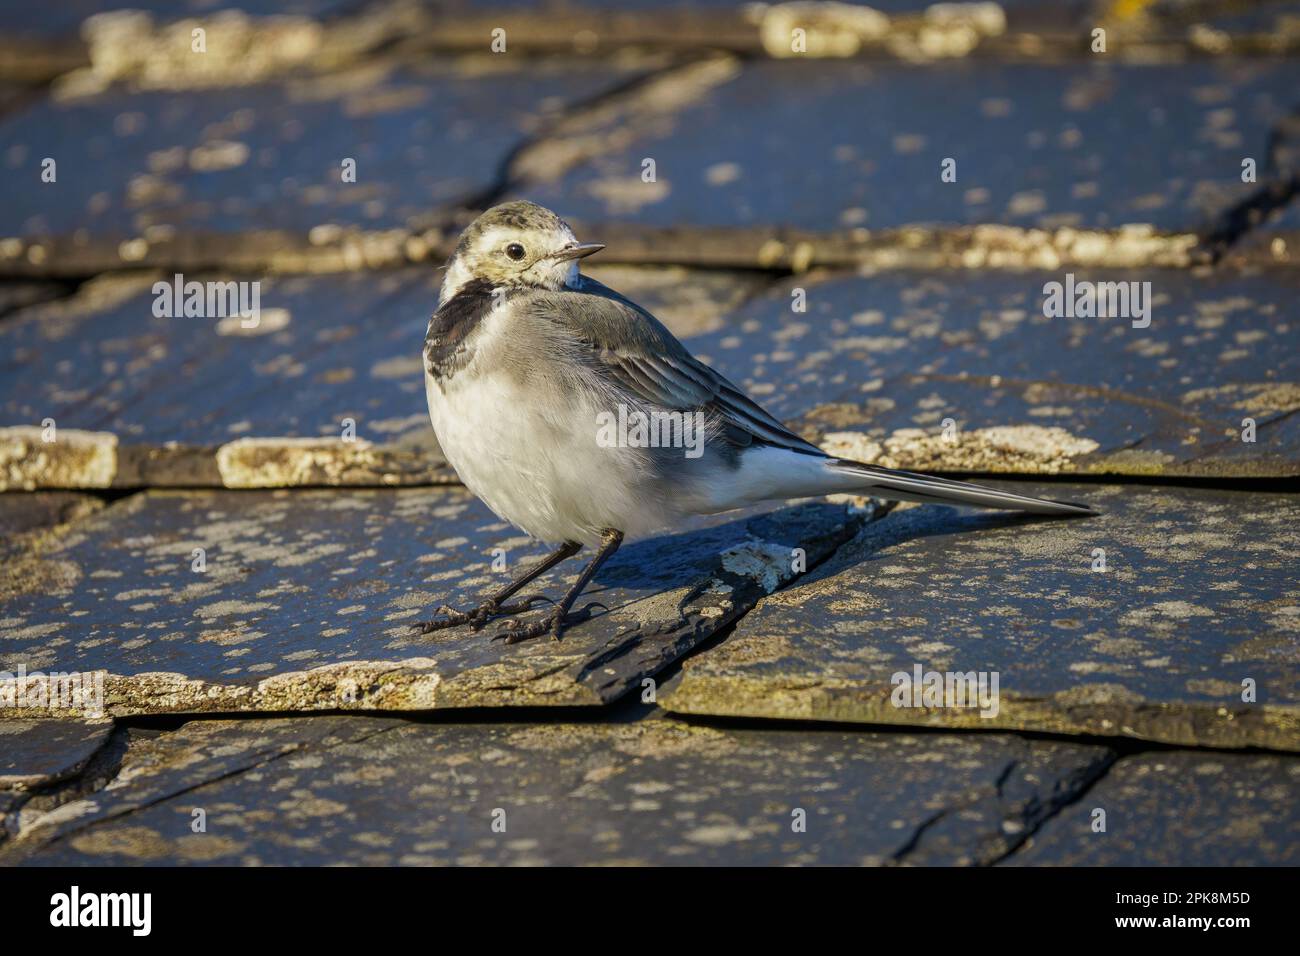 A pied wagtail (Motacilla alba) on a tiled roof at the Callanish visitor centre on the Isle of Lewis in the Outer Hebrides, Scotland Stock Photo